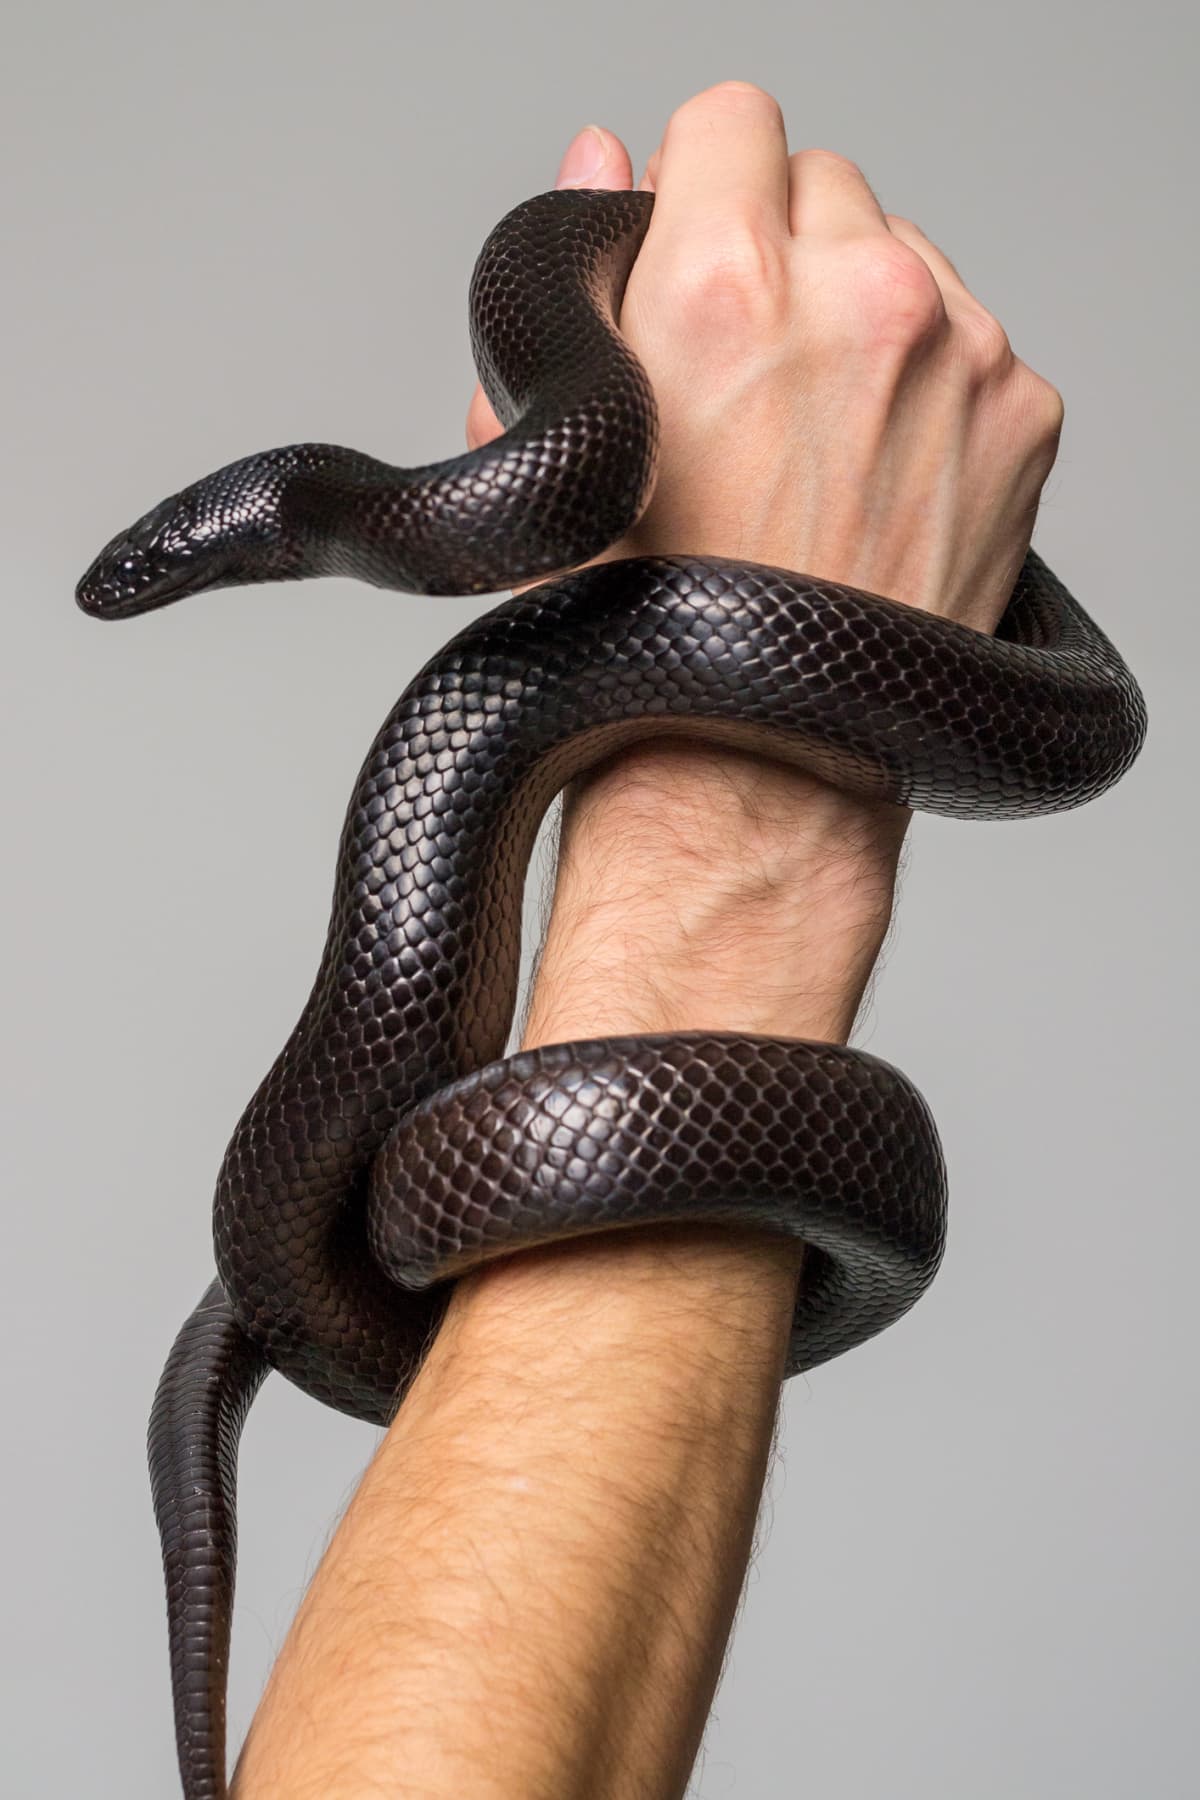 Black snake wrapped around a man's hand and wrist